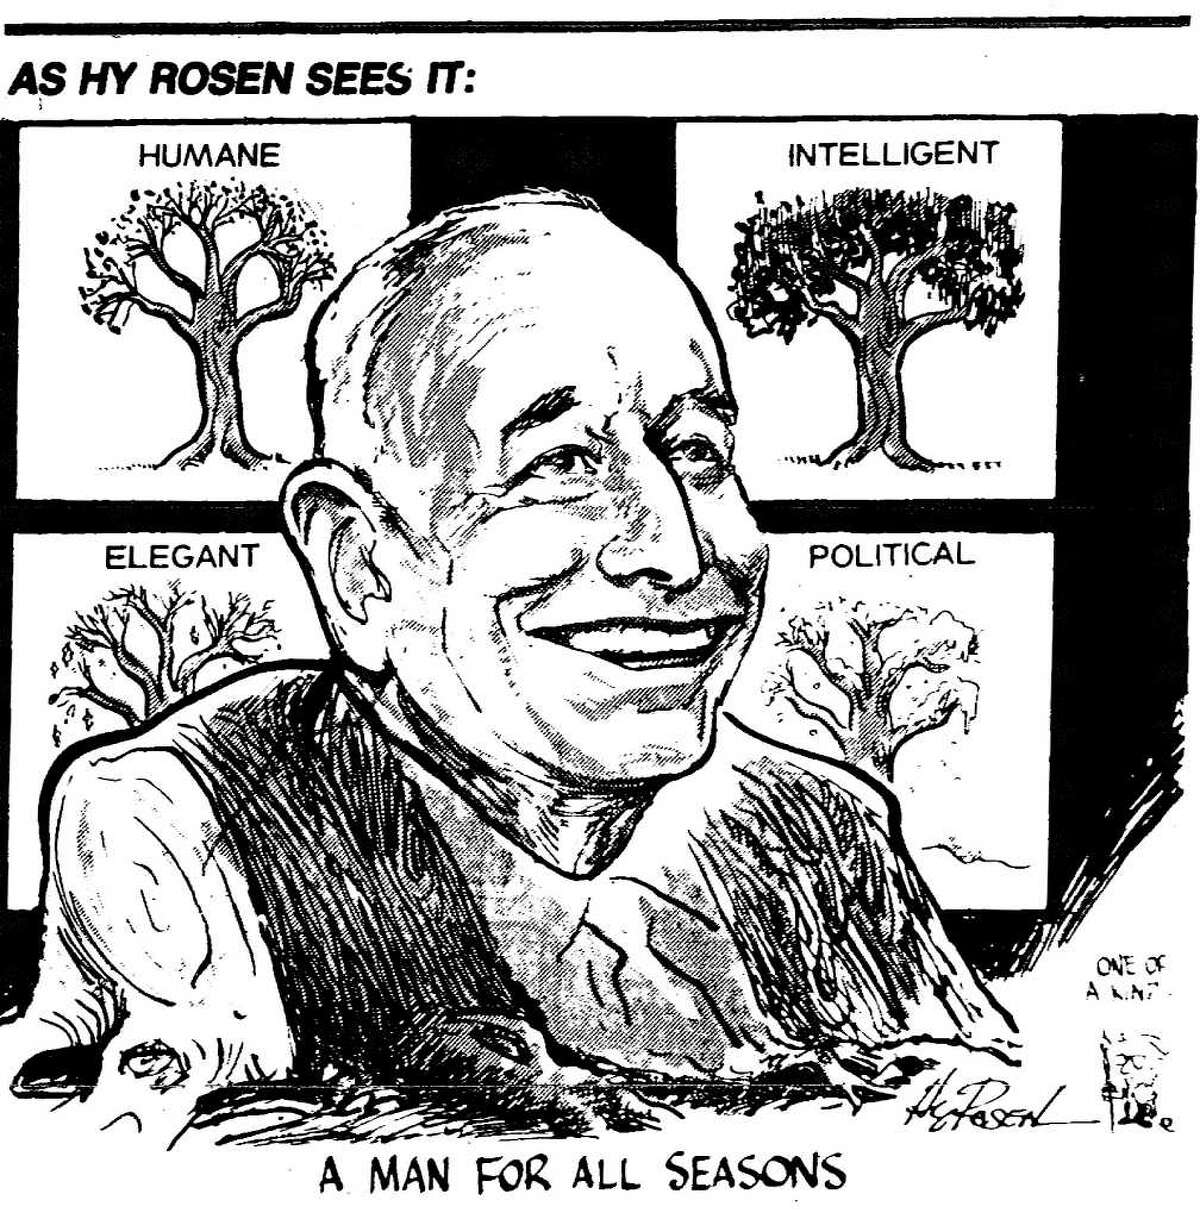 Editorial cartoon by Hy Rosen. June 1, 1983 praises the late Erastus Corning 2nd, who died a few days earlier. Rosen died Feb. 25, 2011 at his home in Loudonville, NY. His cartoonist career at the Times Union spanned five decades. Death of Erastus Corning.